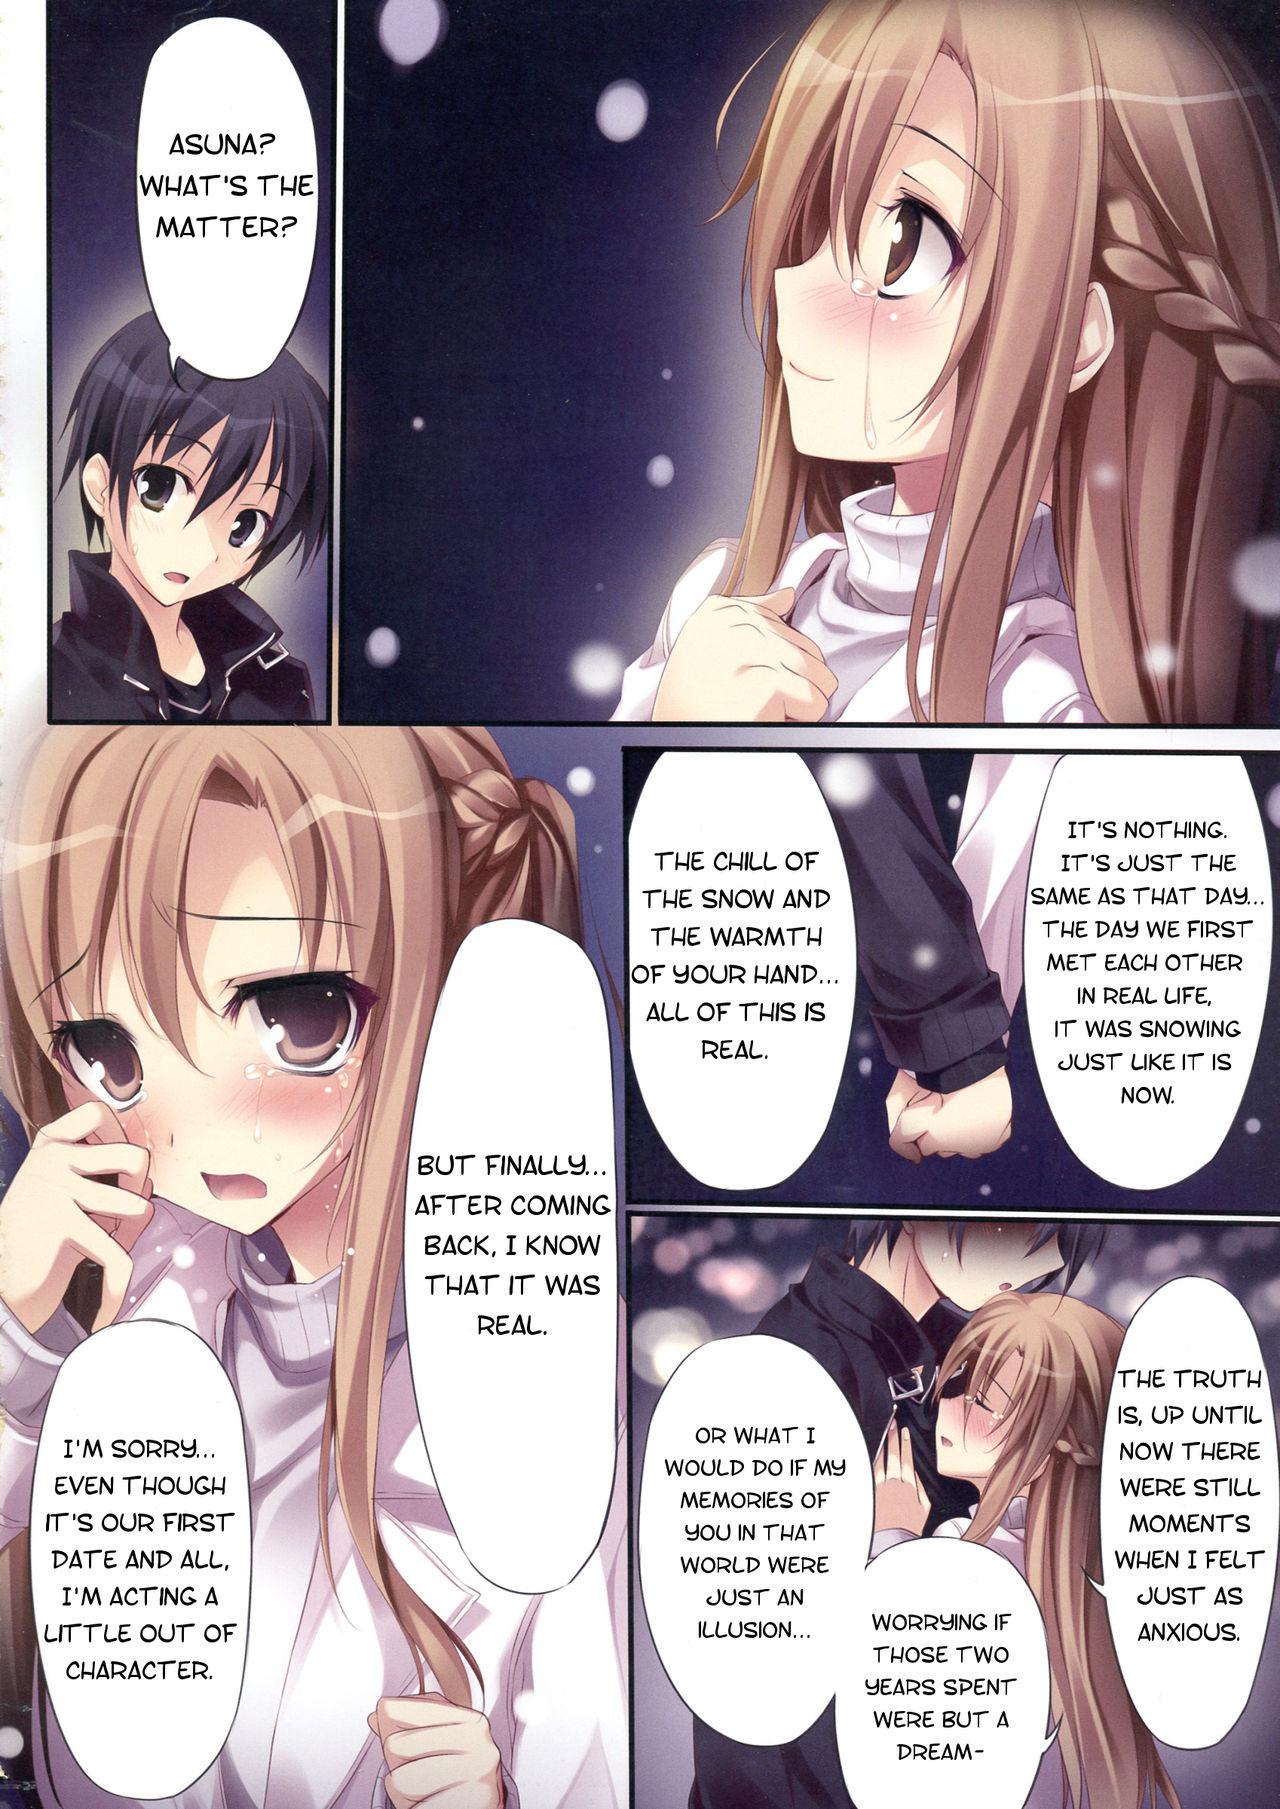 Realamateur KARORFUL MIX EX10 - Sword art online Doggy - Page 4